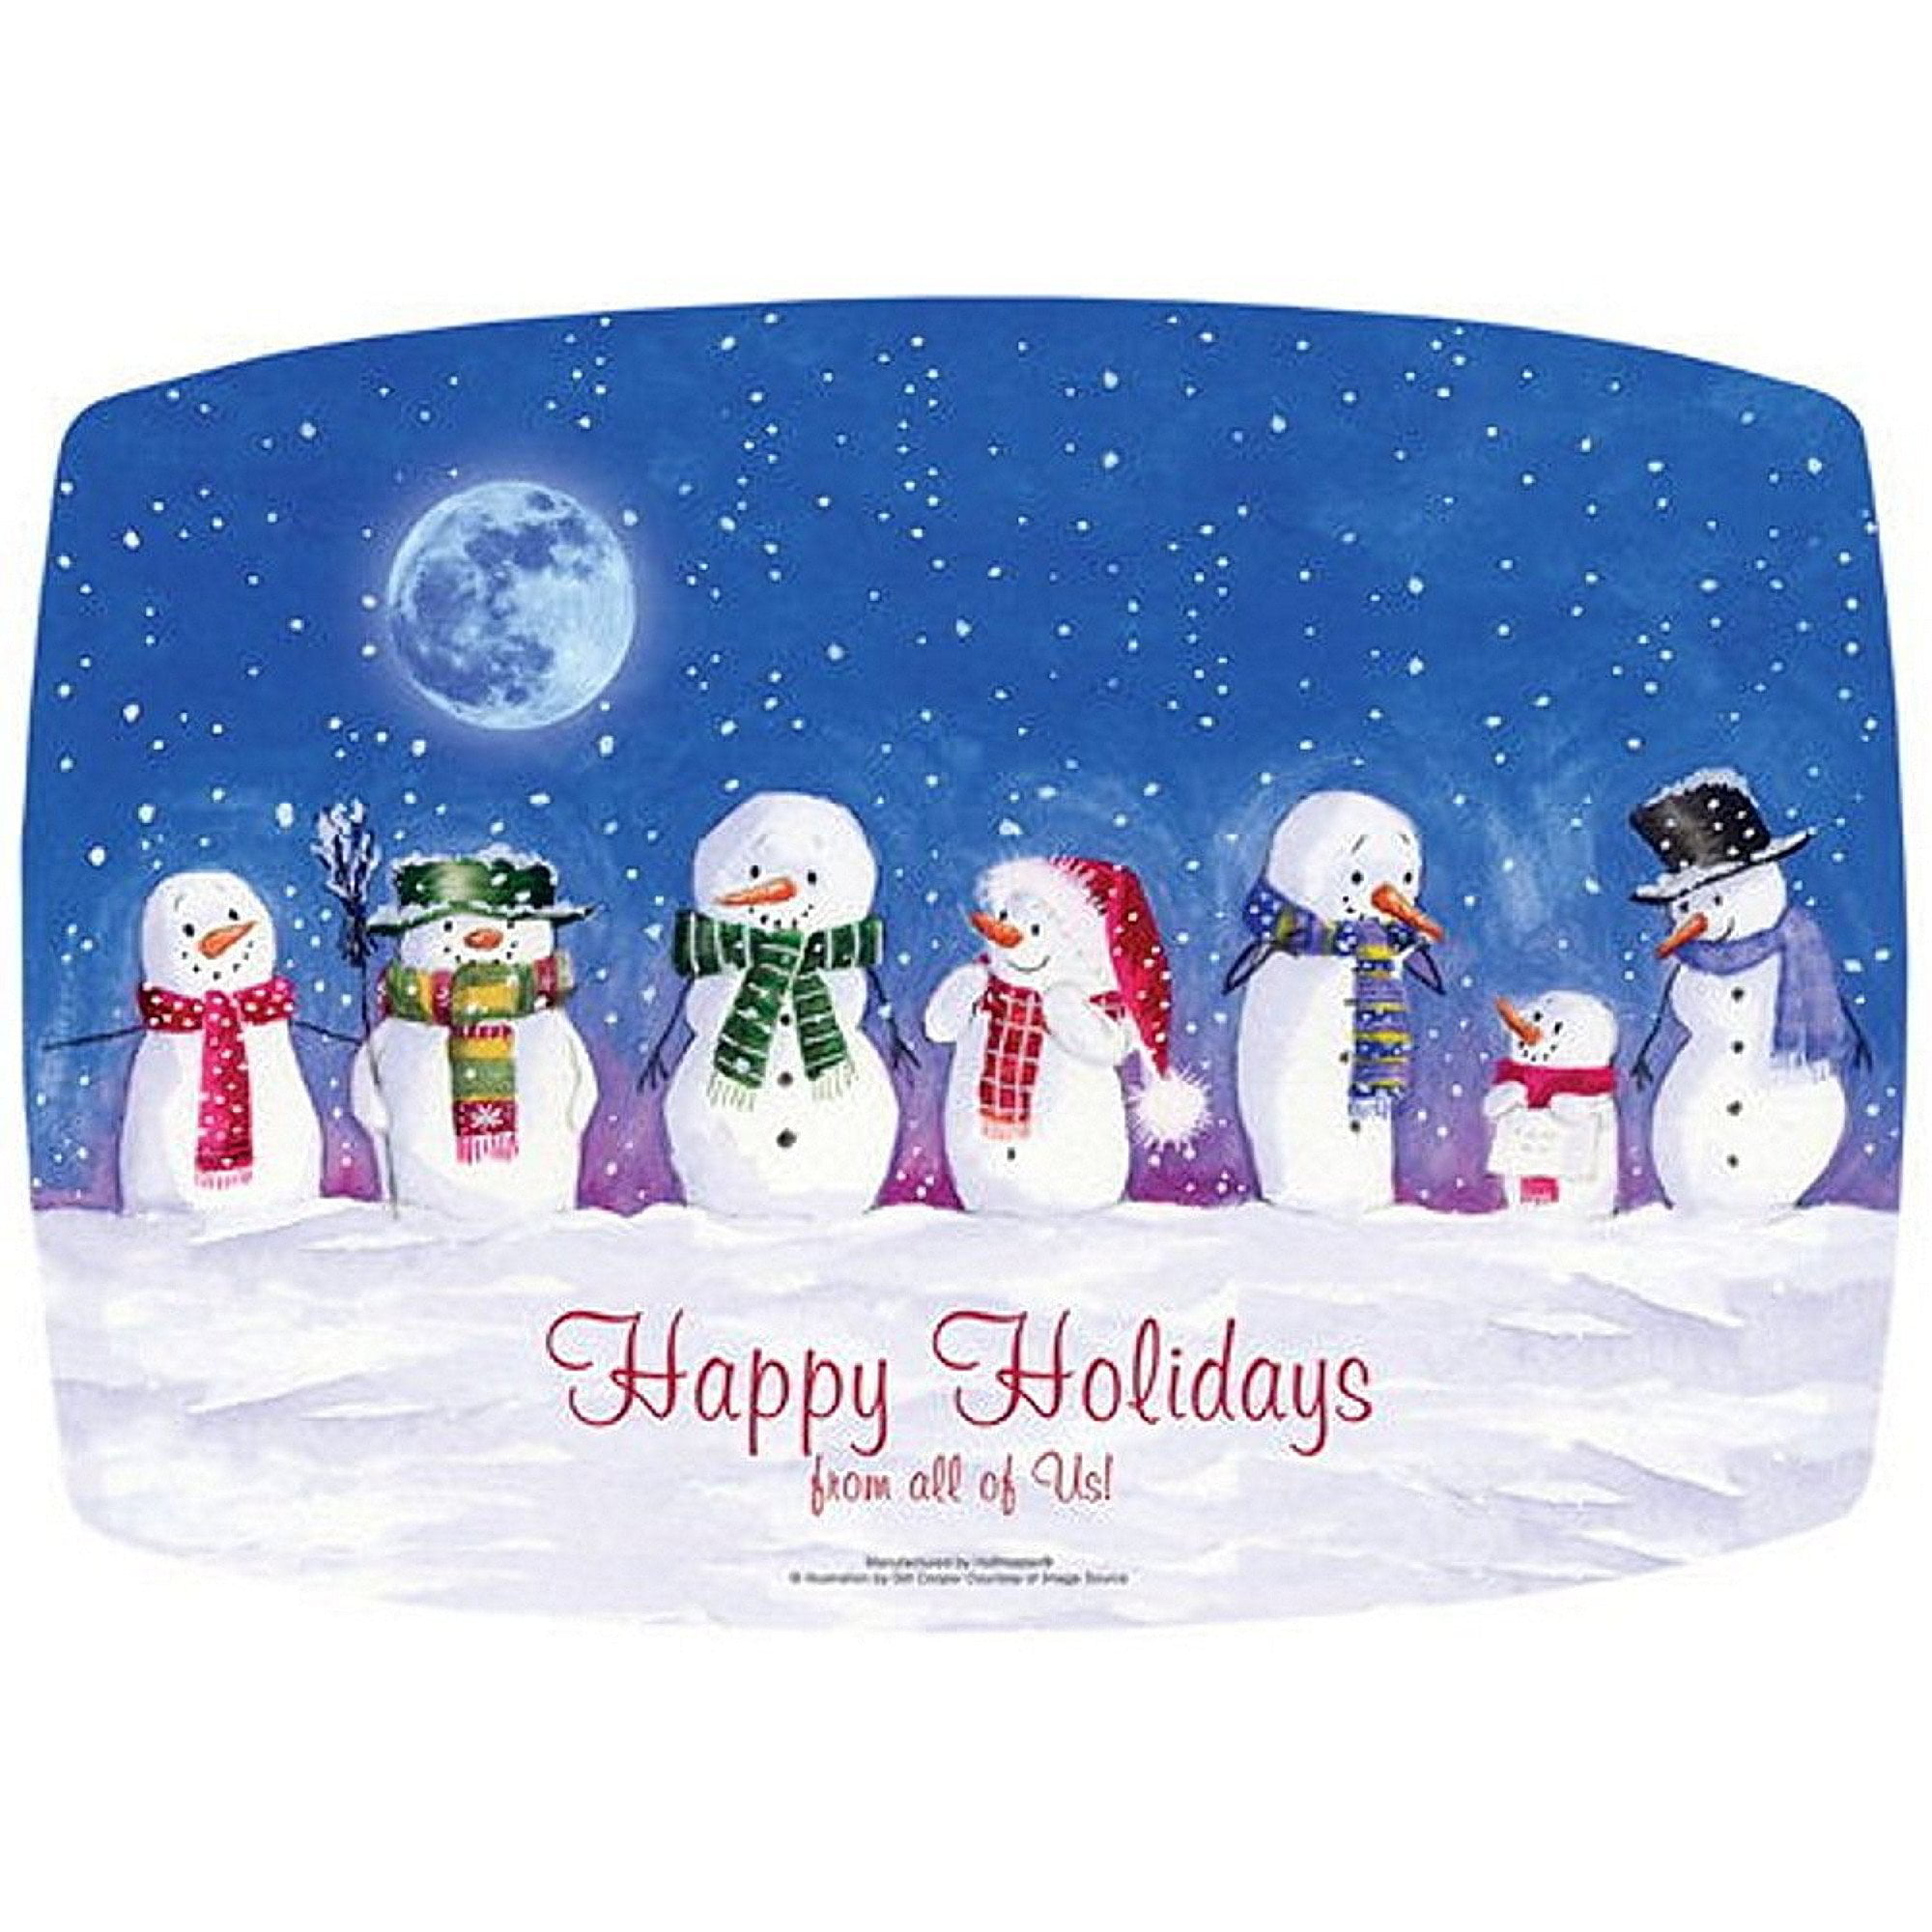 Michel Design Works 17 x 11 Paper Placemats Pad/25 Christmas Season's Greetings 